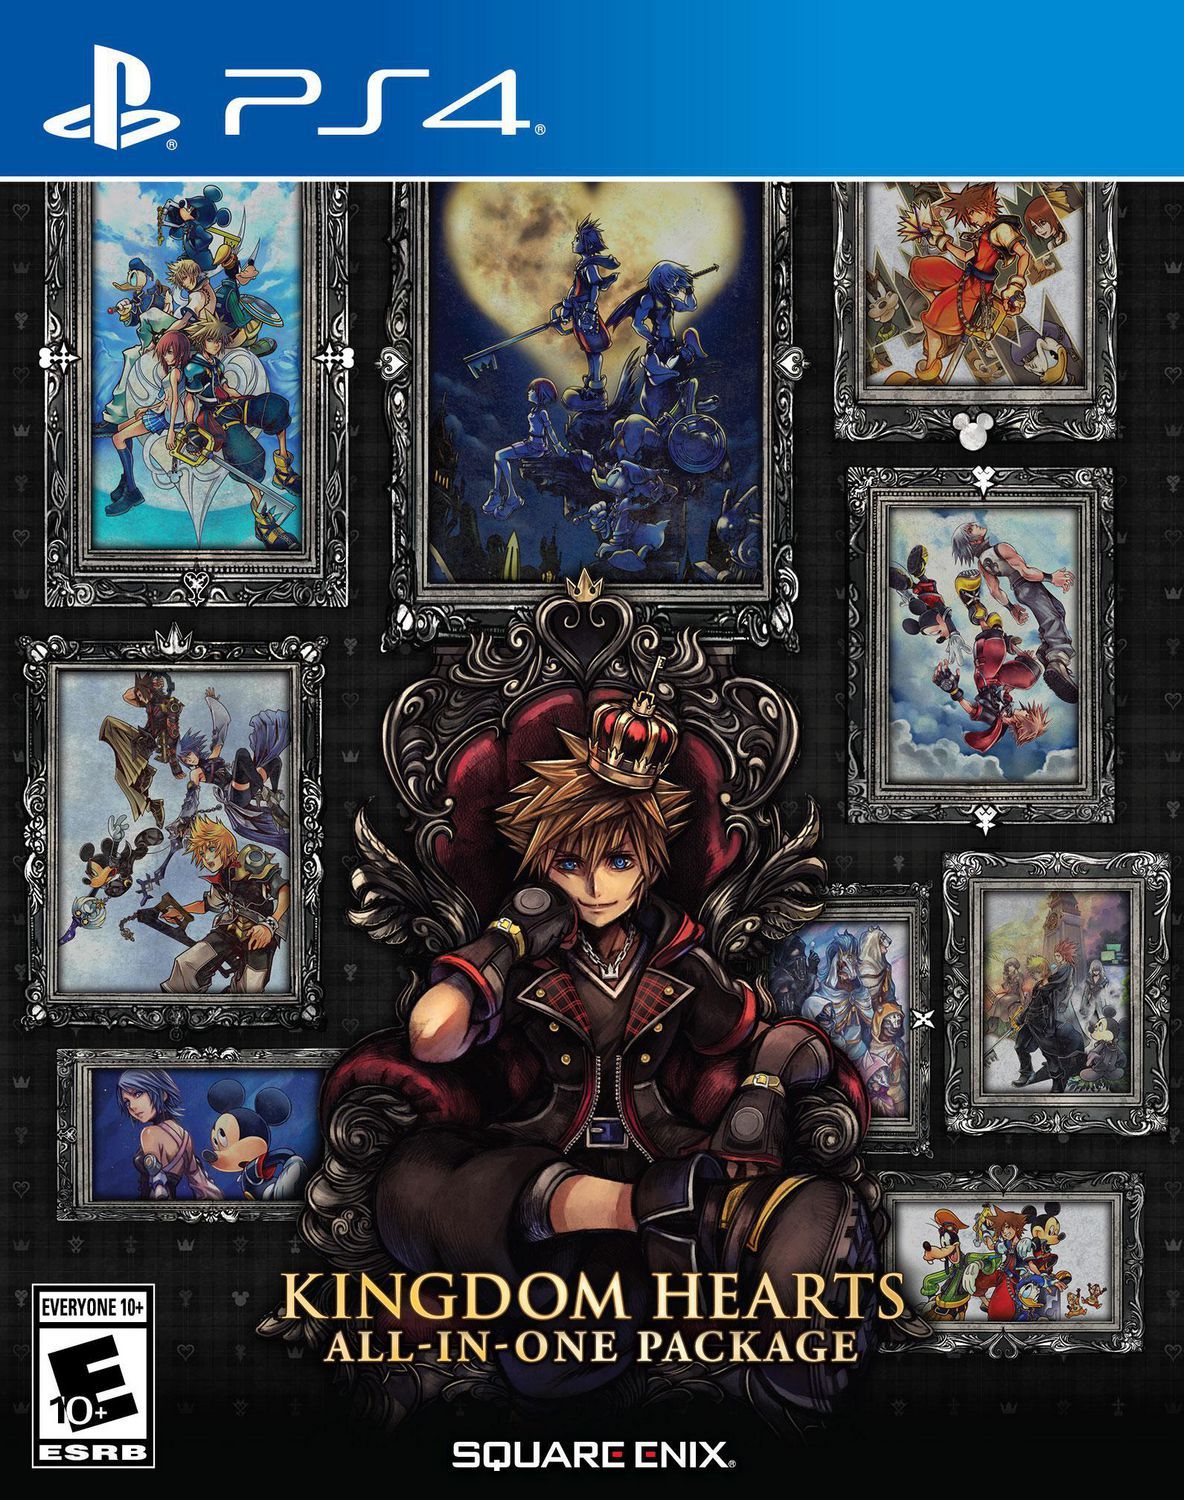 Kingdom Hearts: All-in-One Package Video Game